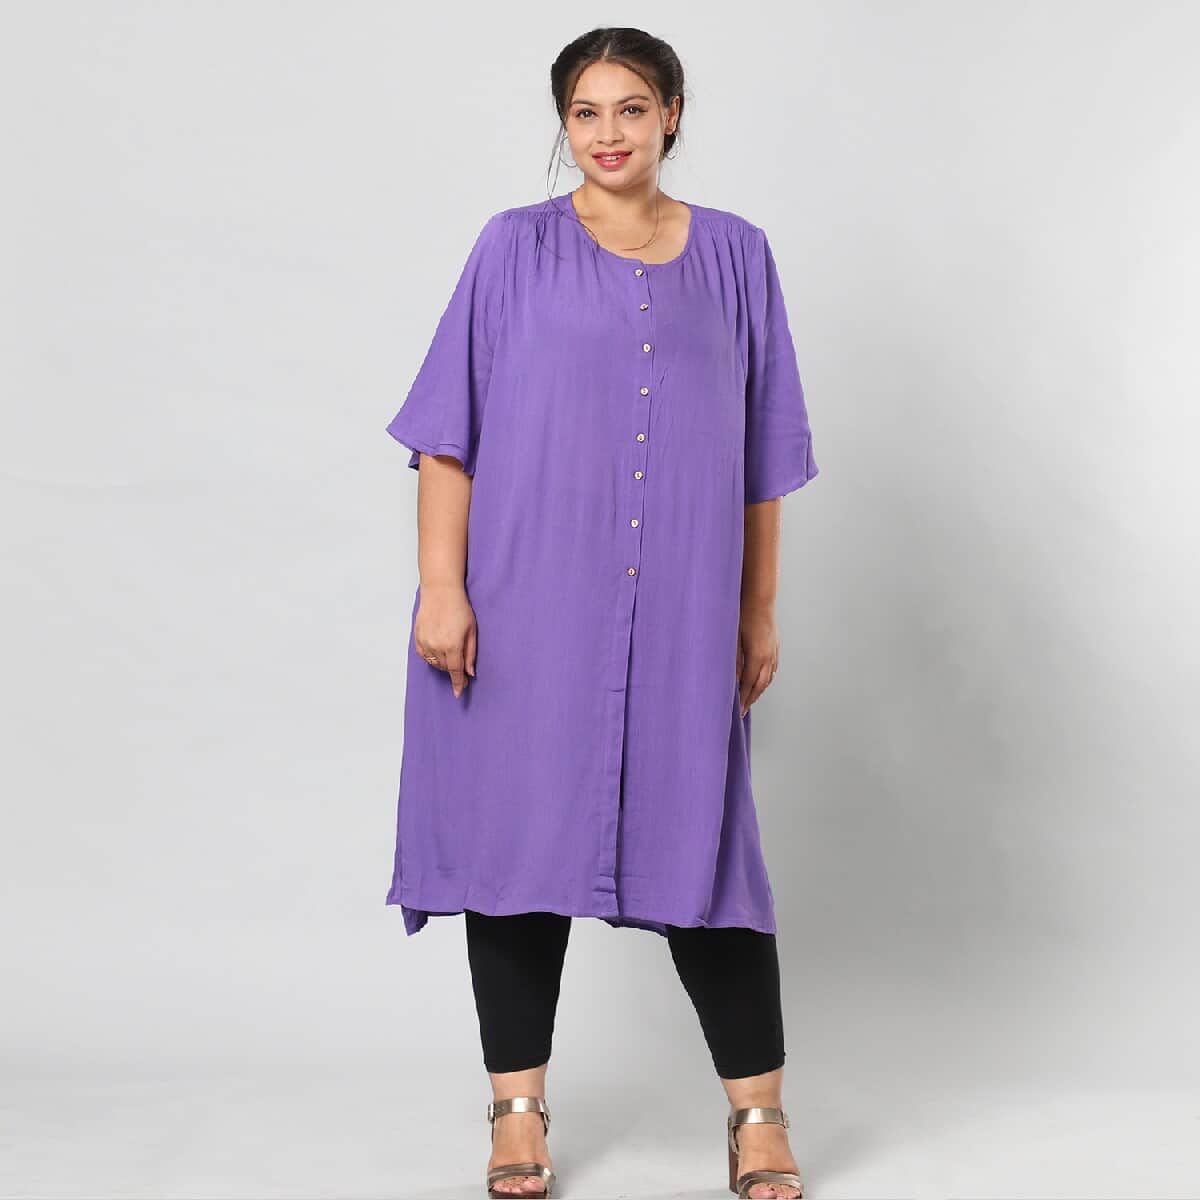 Purple 100% Rayon Top with Front Closure with Button- L/XL image number 0